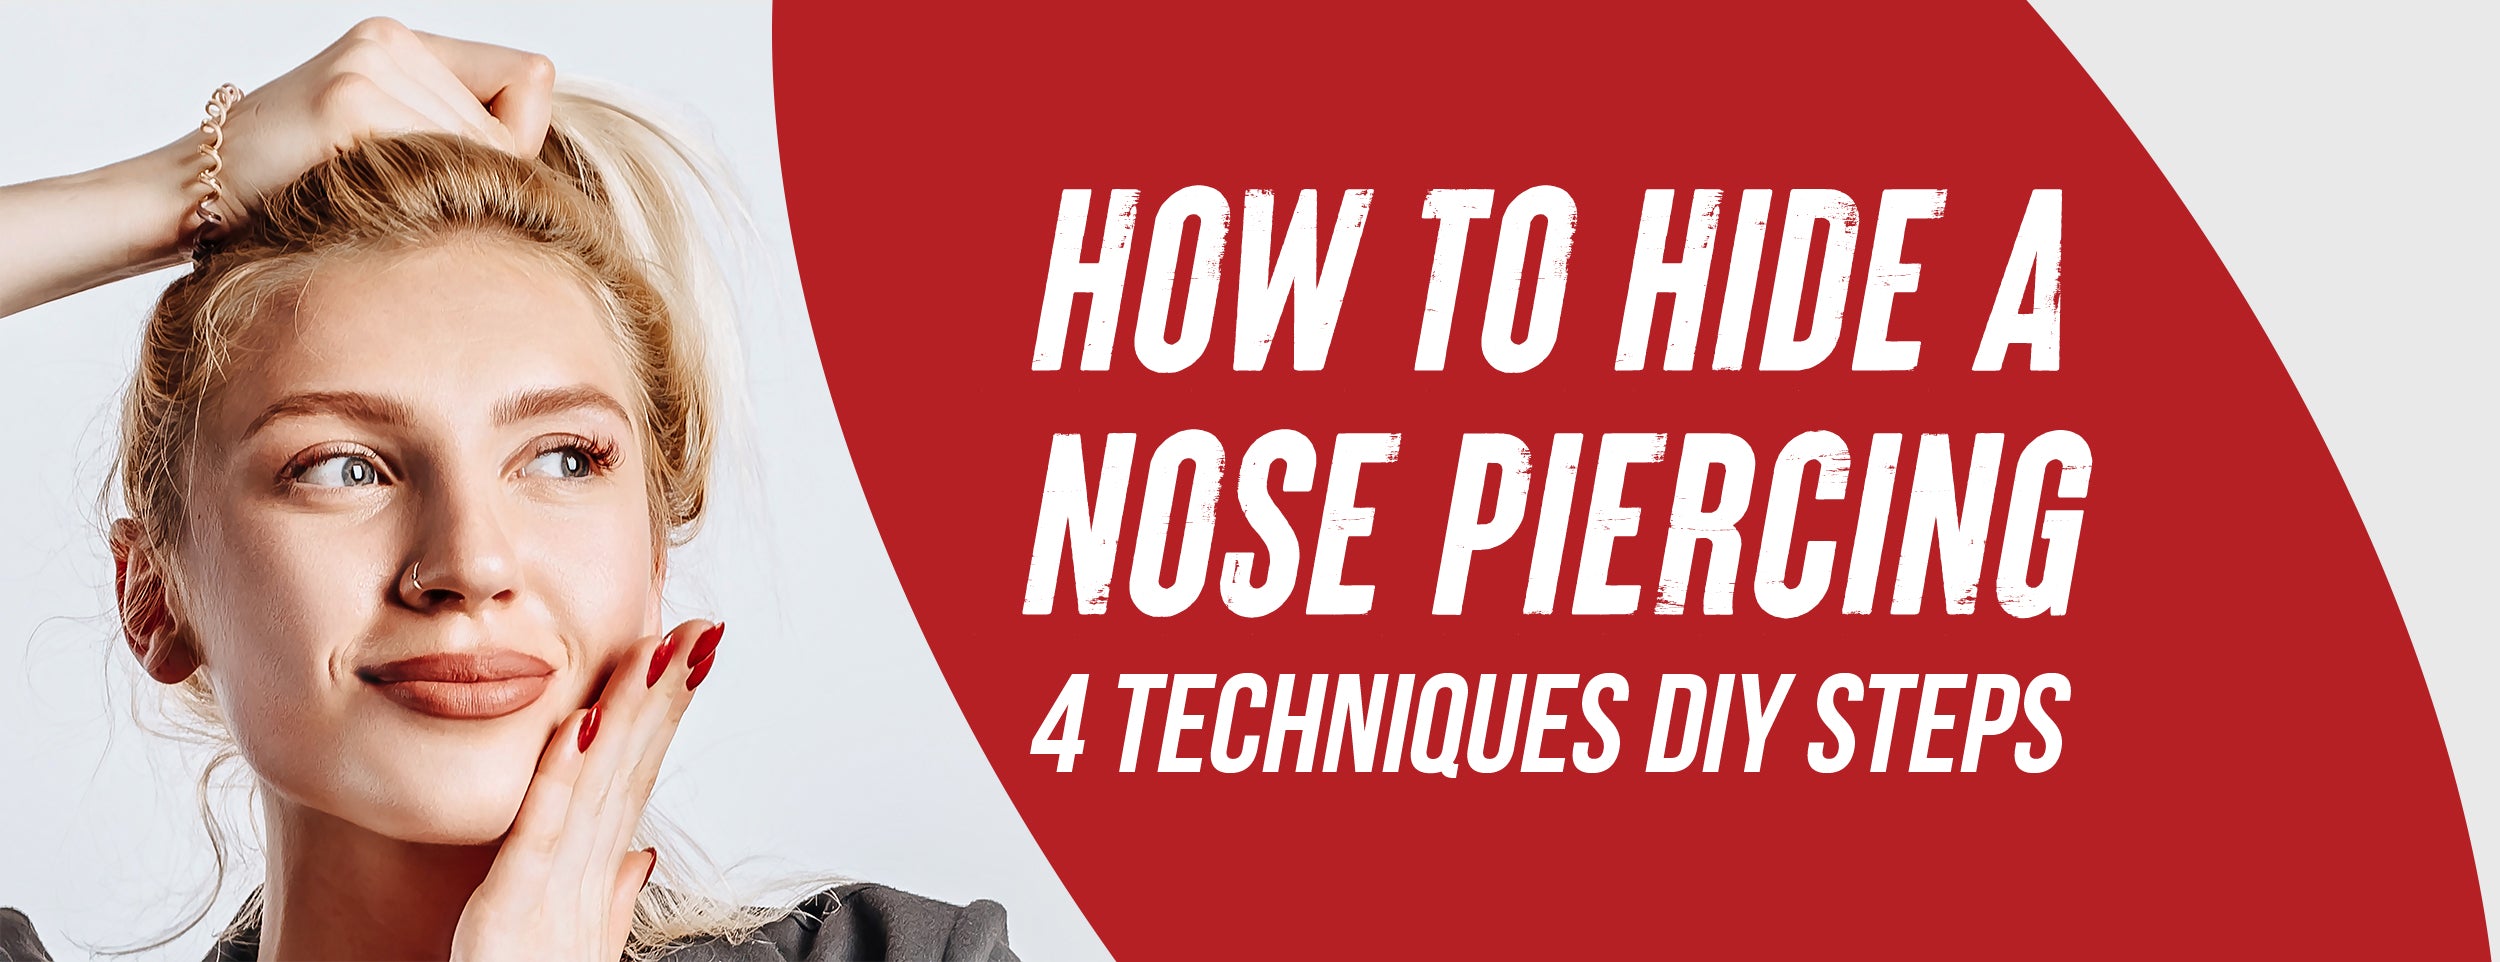  4 Techniques and Procedures for Hiding a Nose Piercing